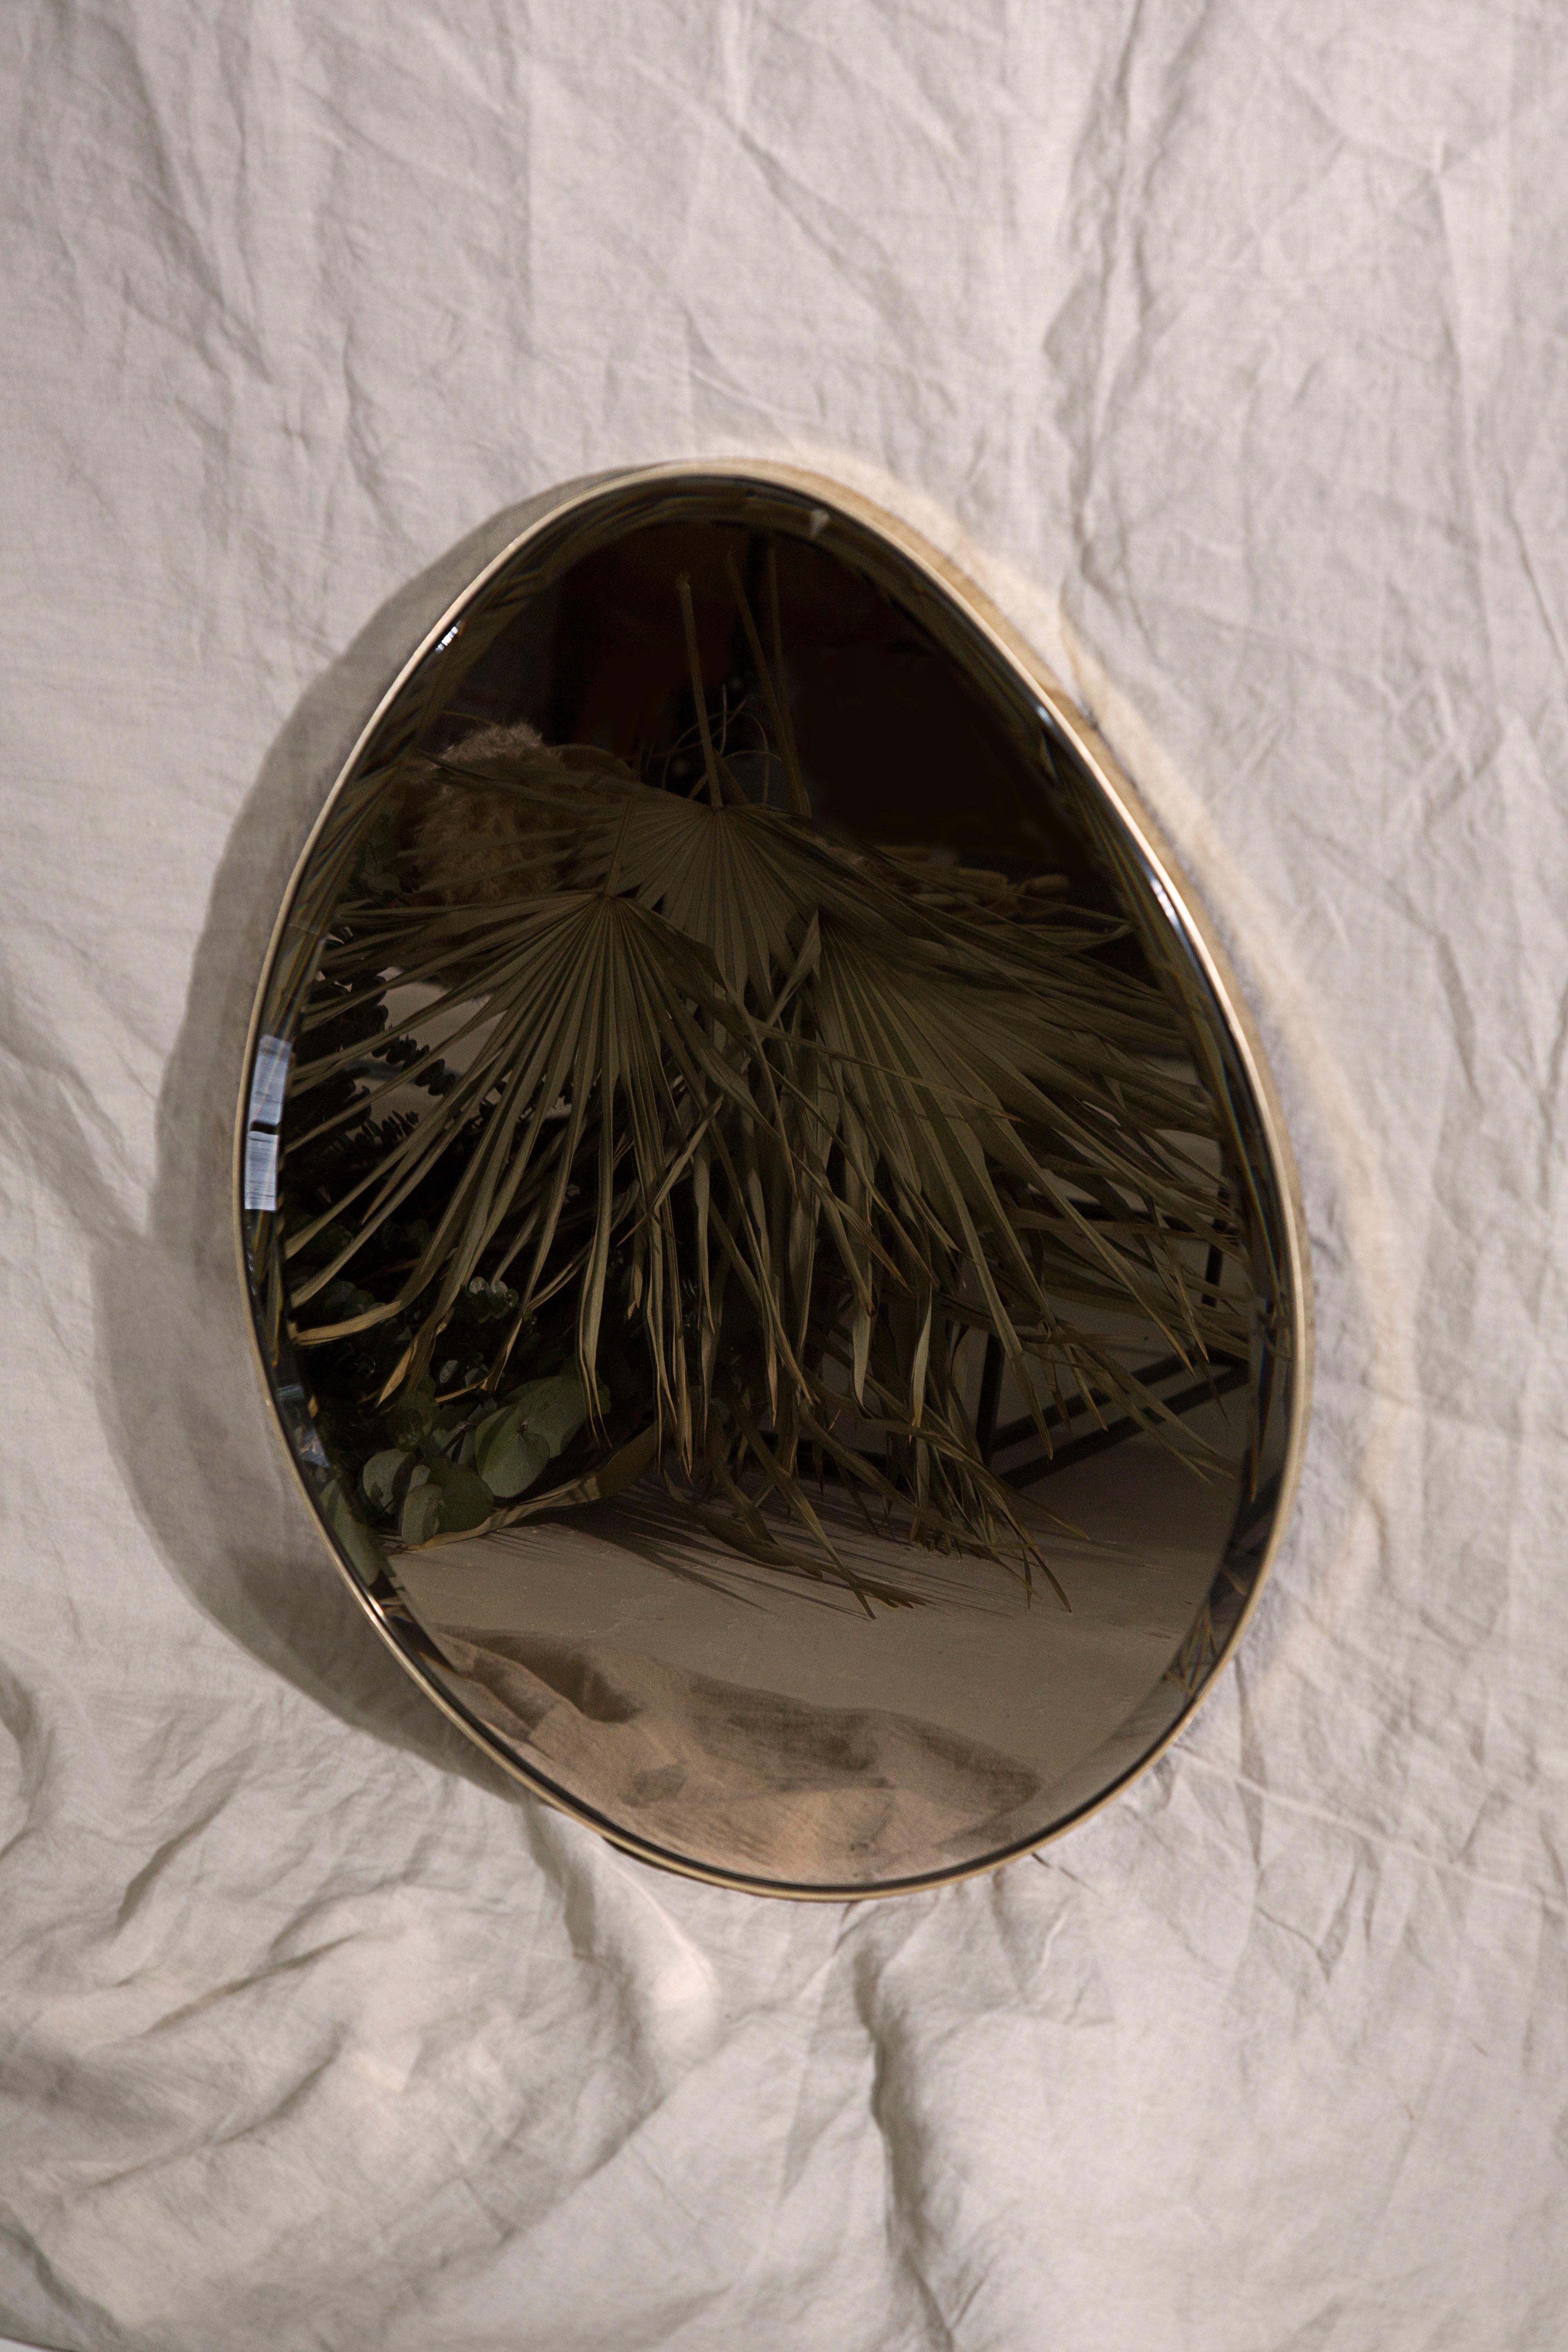 Egg mirror signed by Novocastrian
Measures: 450 (W) x 600 (H) x 20 (D)
Materials: Polished Brass
Custom sizes available.

Novocastrian

We are metalworkers, architects, welders, artists, makers, engineers, and designers. We forge bespoke objects and